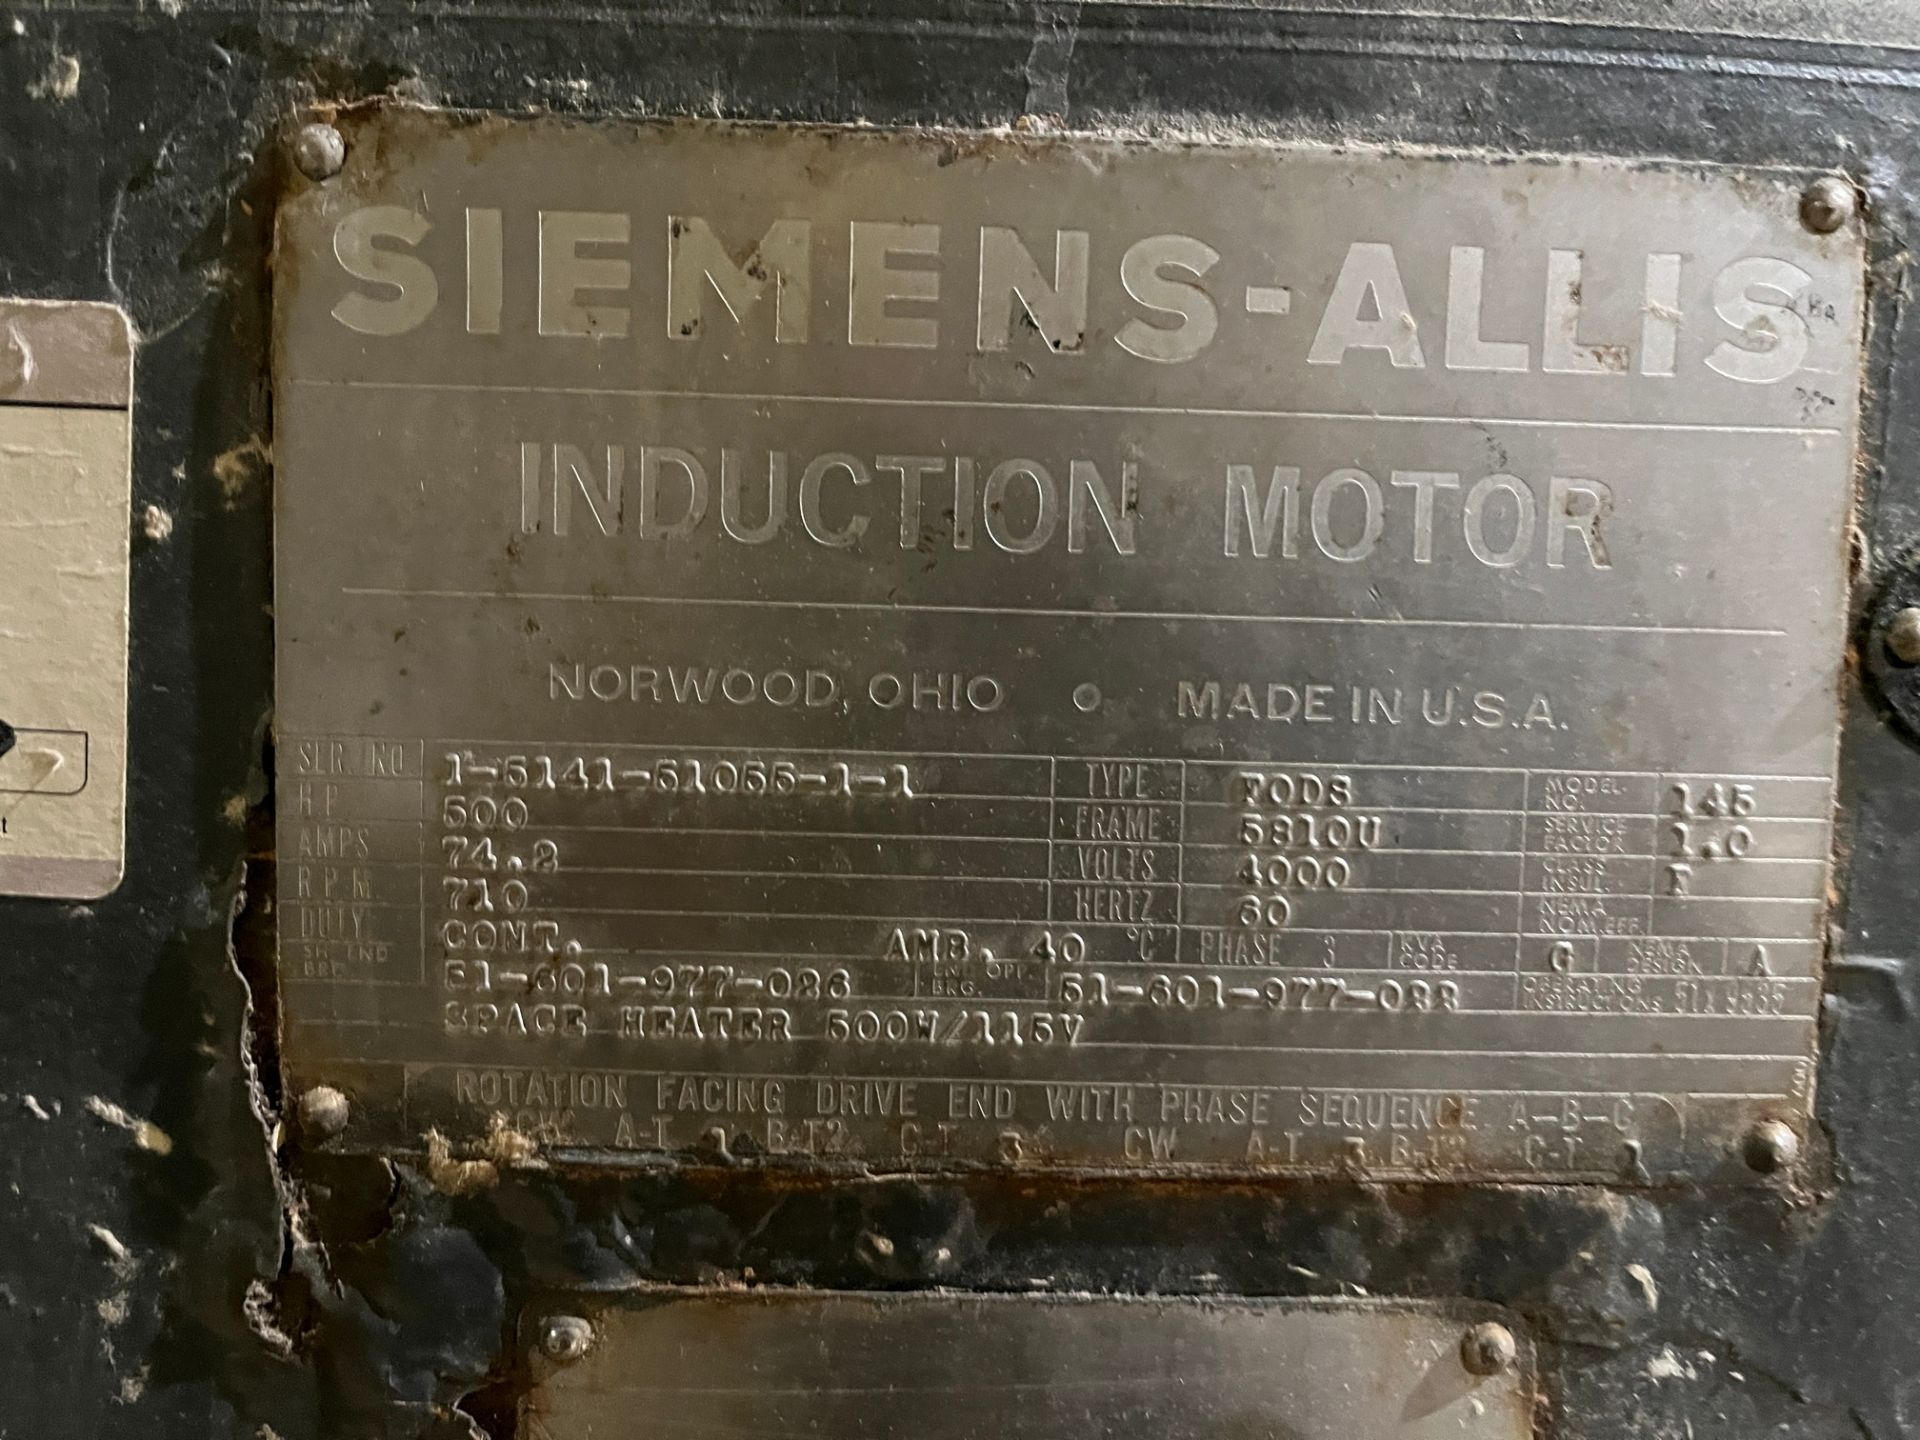 SIEMENS-ALLIS ELECTRIC MOTOR, 500HP, 710 RPM, 4,000V, 5810U FRAME (PREVIOUSLY USED WITH SPROUT - Image 2 of 2